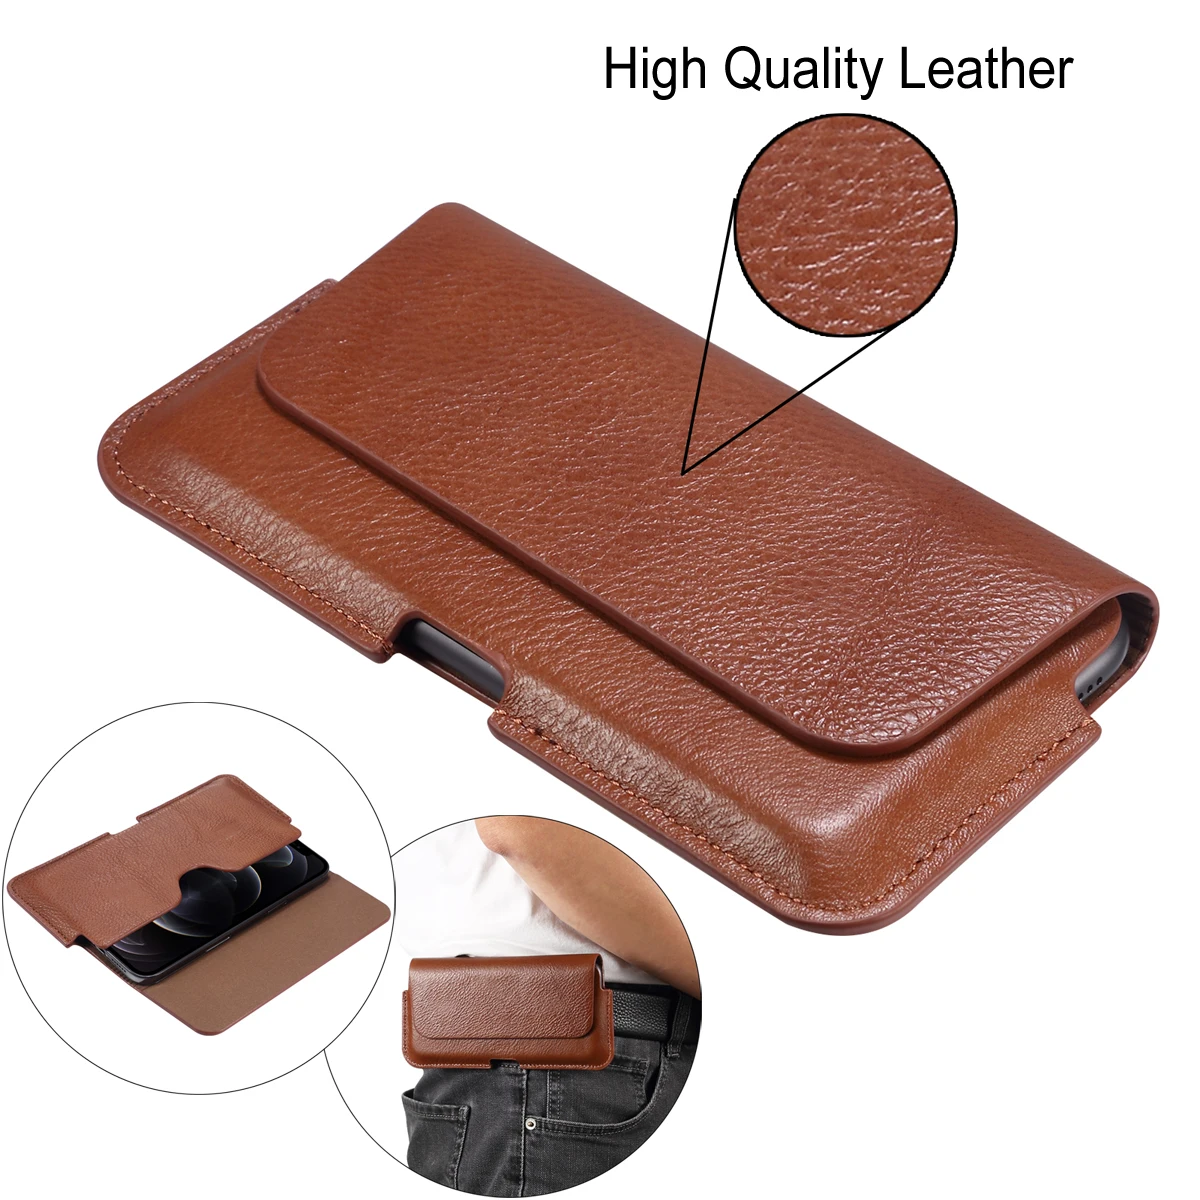 

Leather Case Phone Bag for Samsung A50 A51 A71 A70 S21 S22 Ultra S20 S9 S8 Plus Waist Bag Belt Cover for Huawei Mate 30 P40 P50